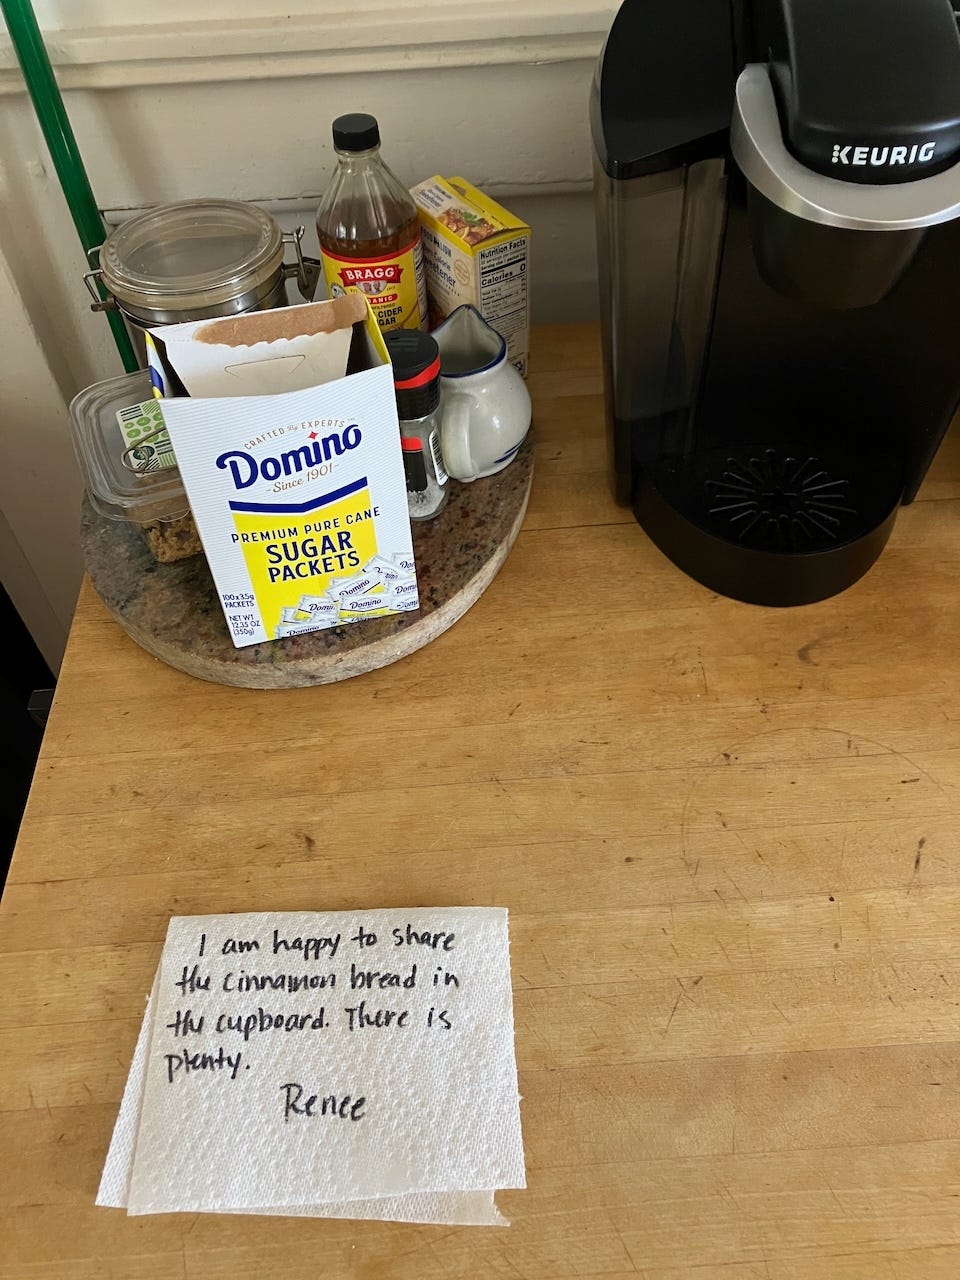 Coffee maker next to box of sugar packets and a note written on a paper towel reading "I am happy to share the cinnamon bread in the cupboard. There is plenty--Renee"